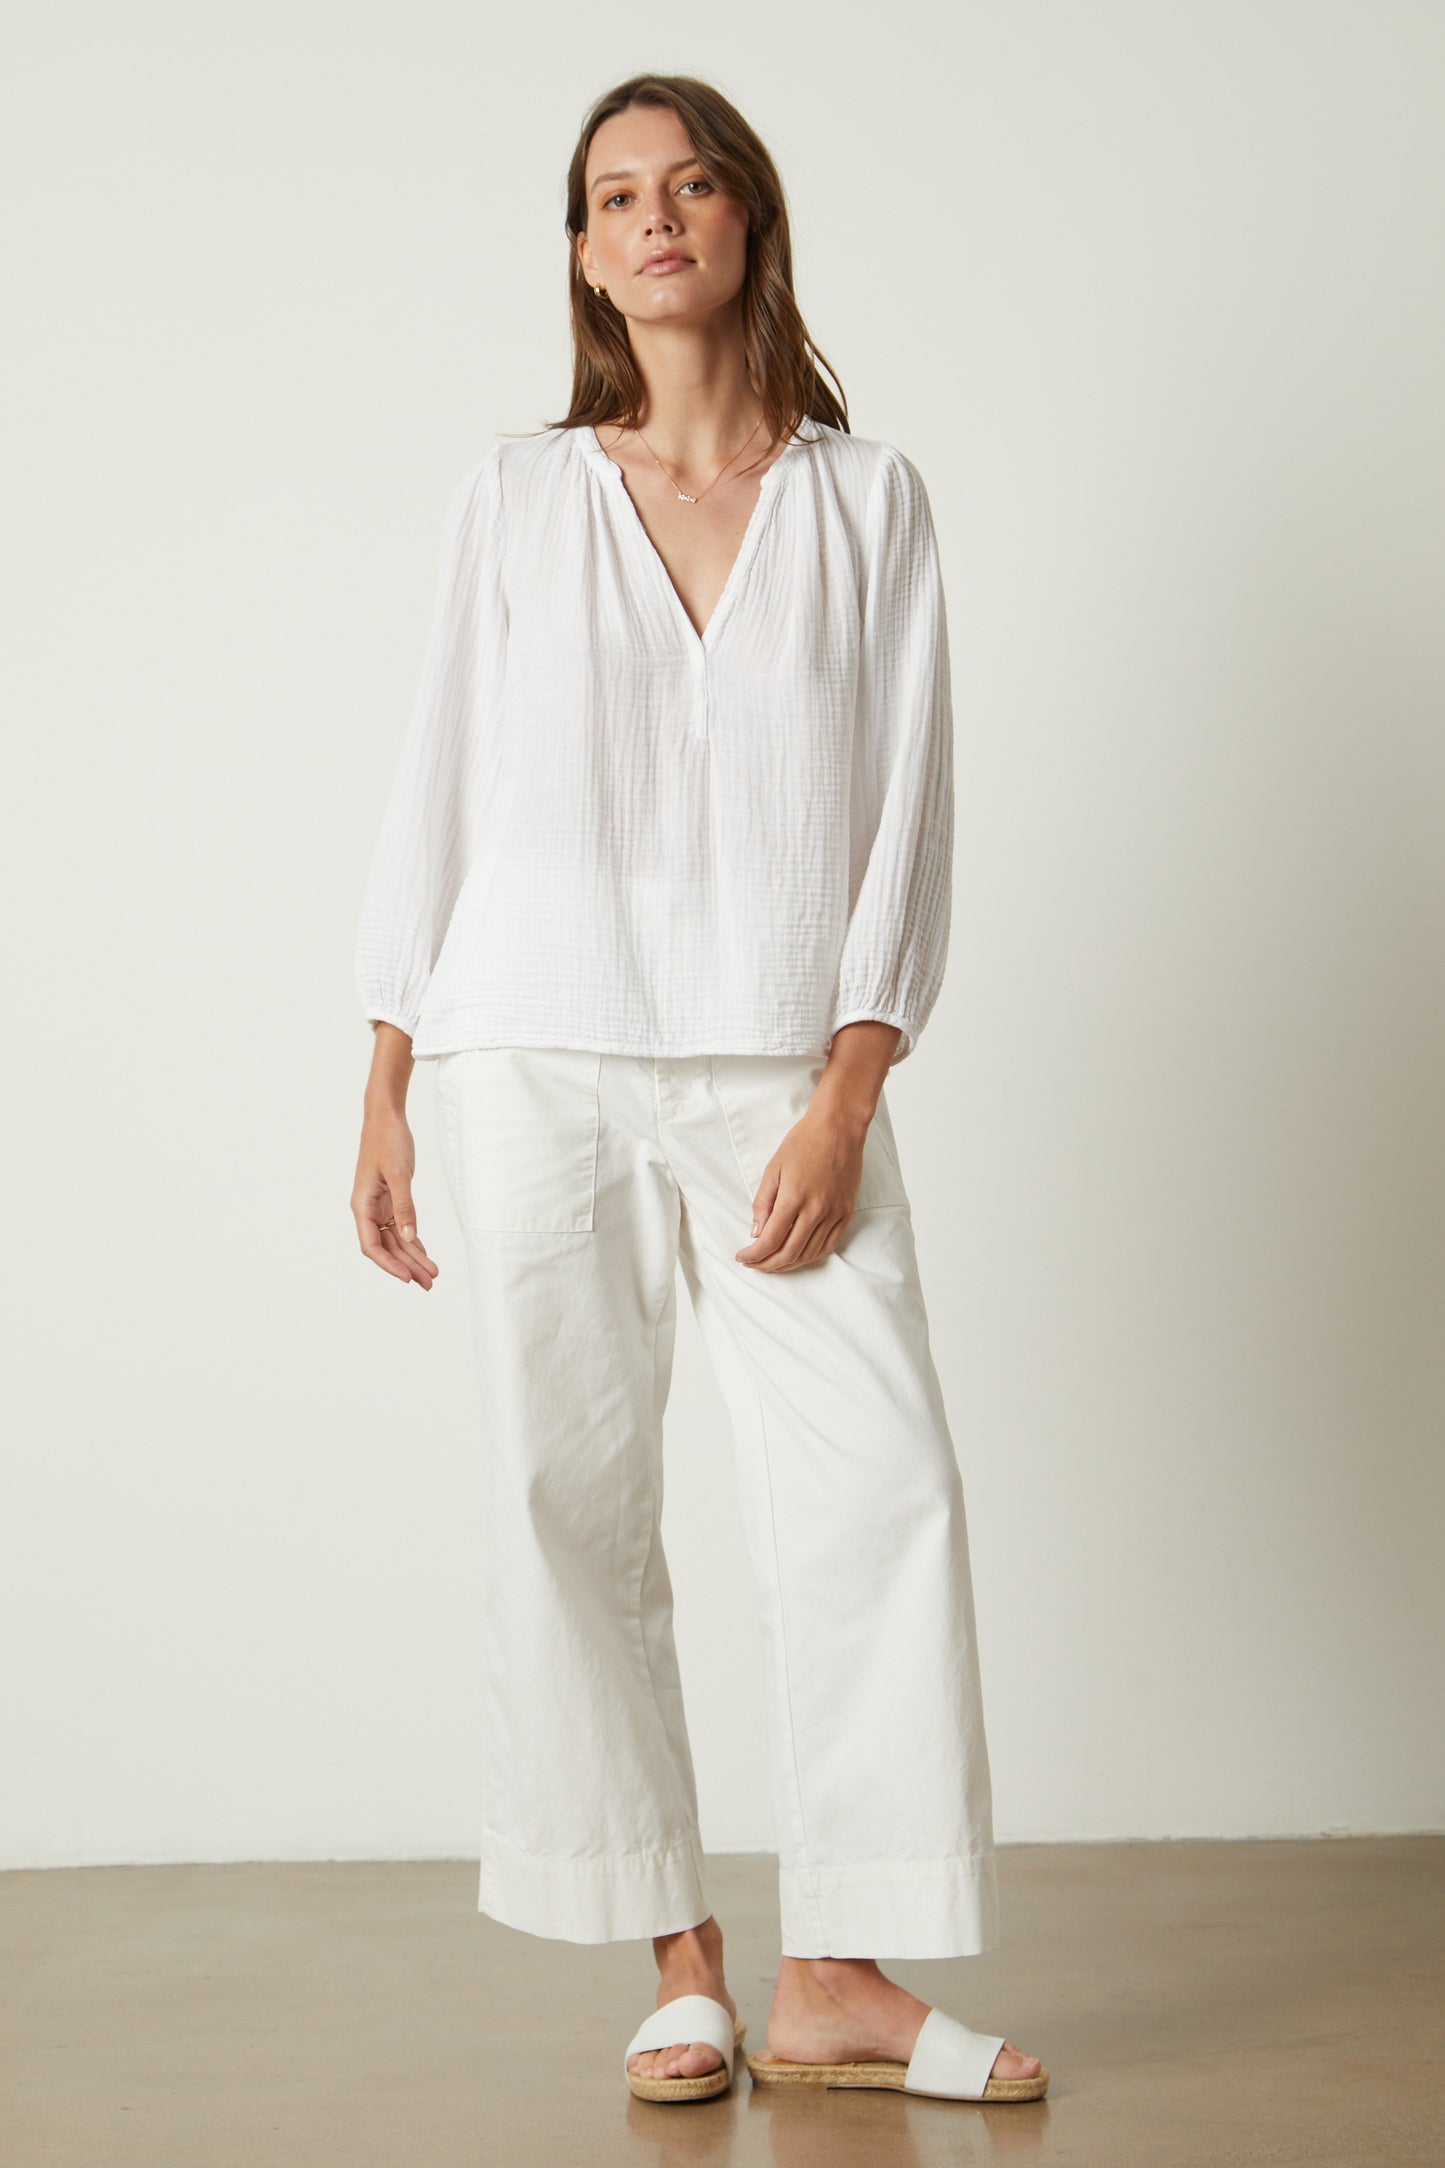 The model is wearing a white MAGGIE COTTON GAUZE V-NECK TOP blouse and white wide leg pants. (Brand Name: Velvet by Graham & Spencer)-26266808615105